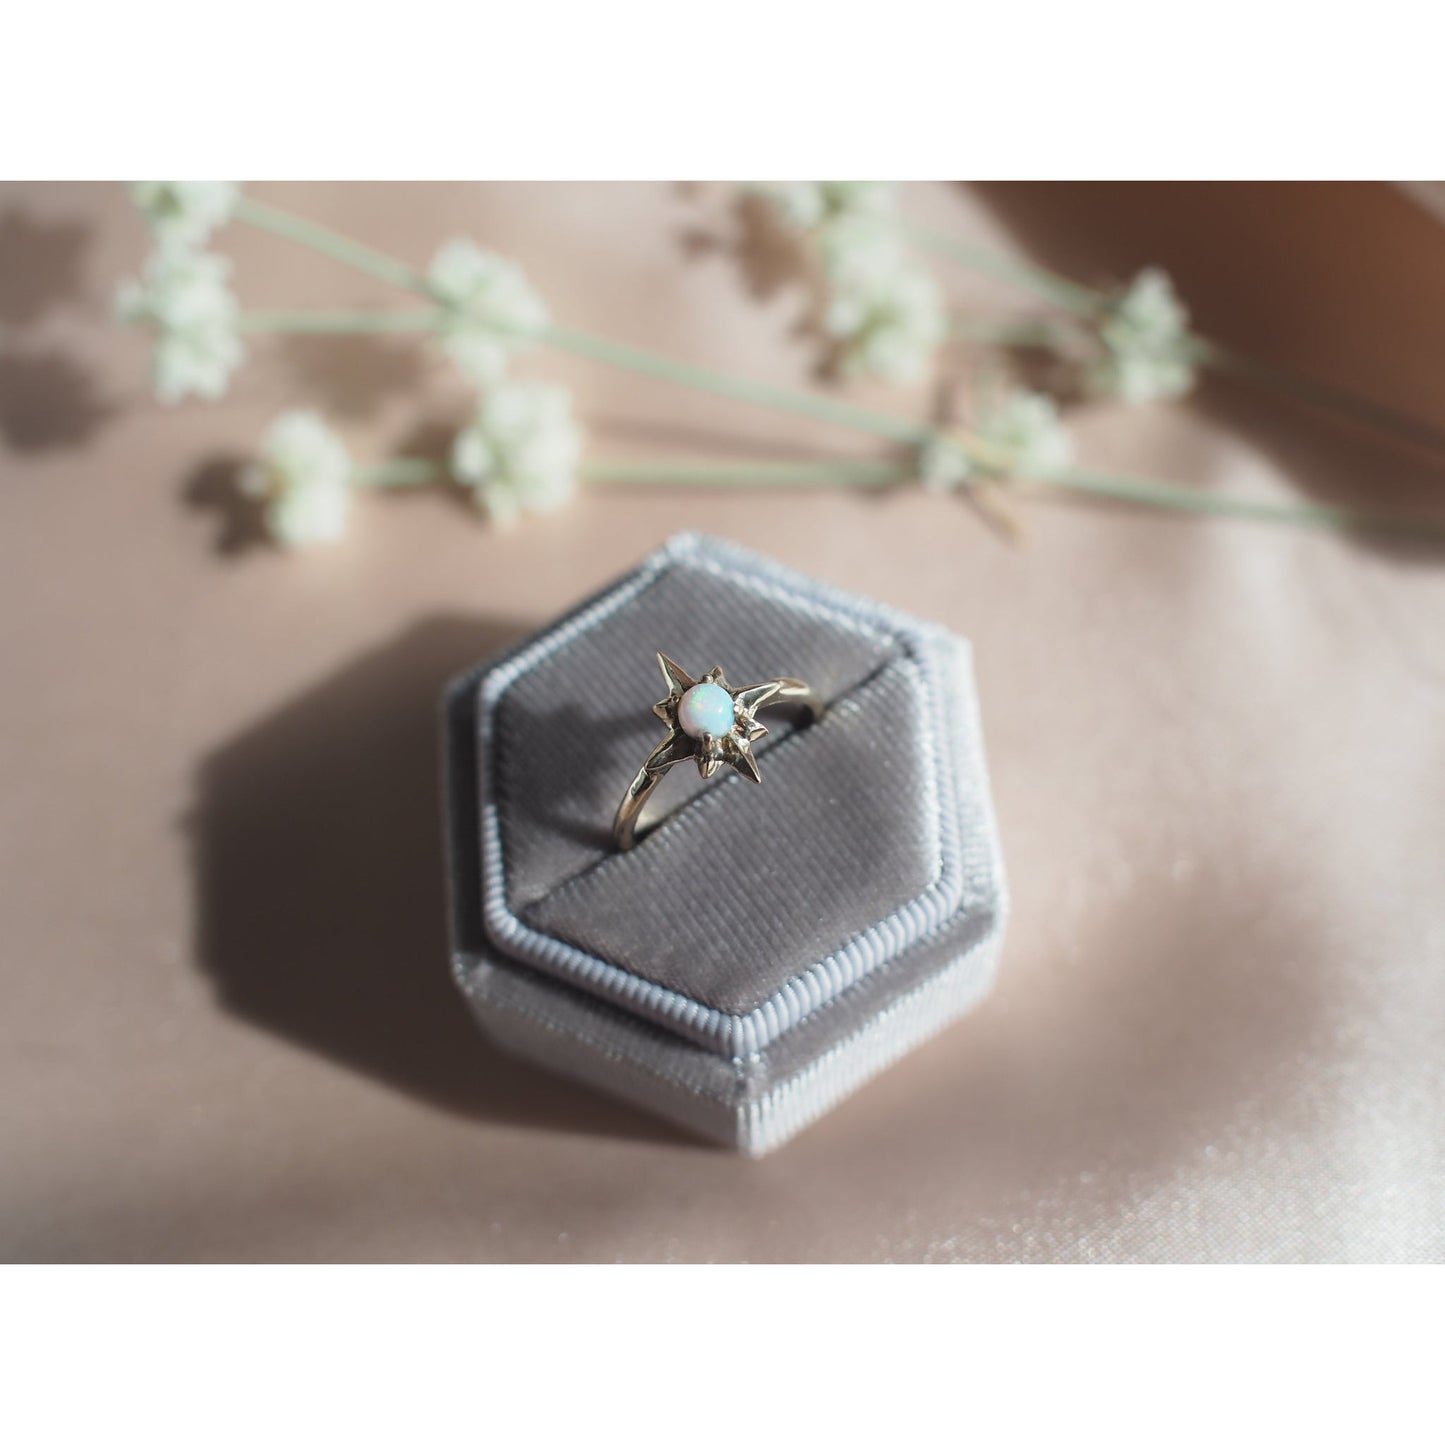 Polaris north star ring set with a tiny lab grown opal in sterling silver handmade by Iron Oxide Designs in a velvet ring box 